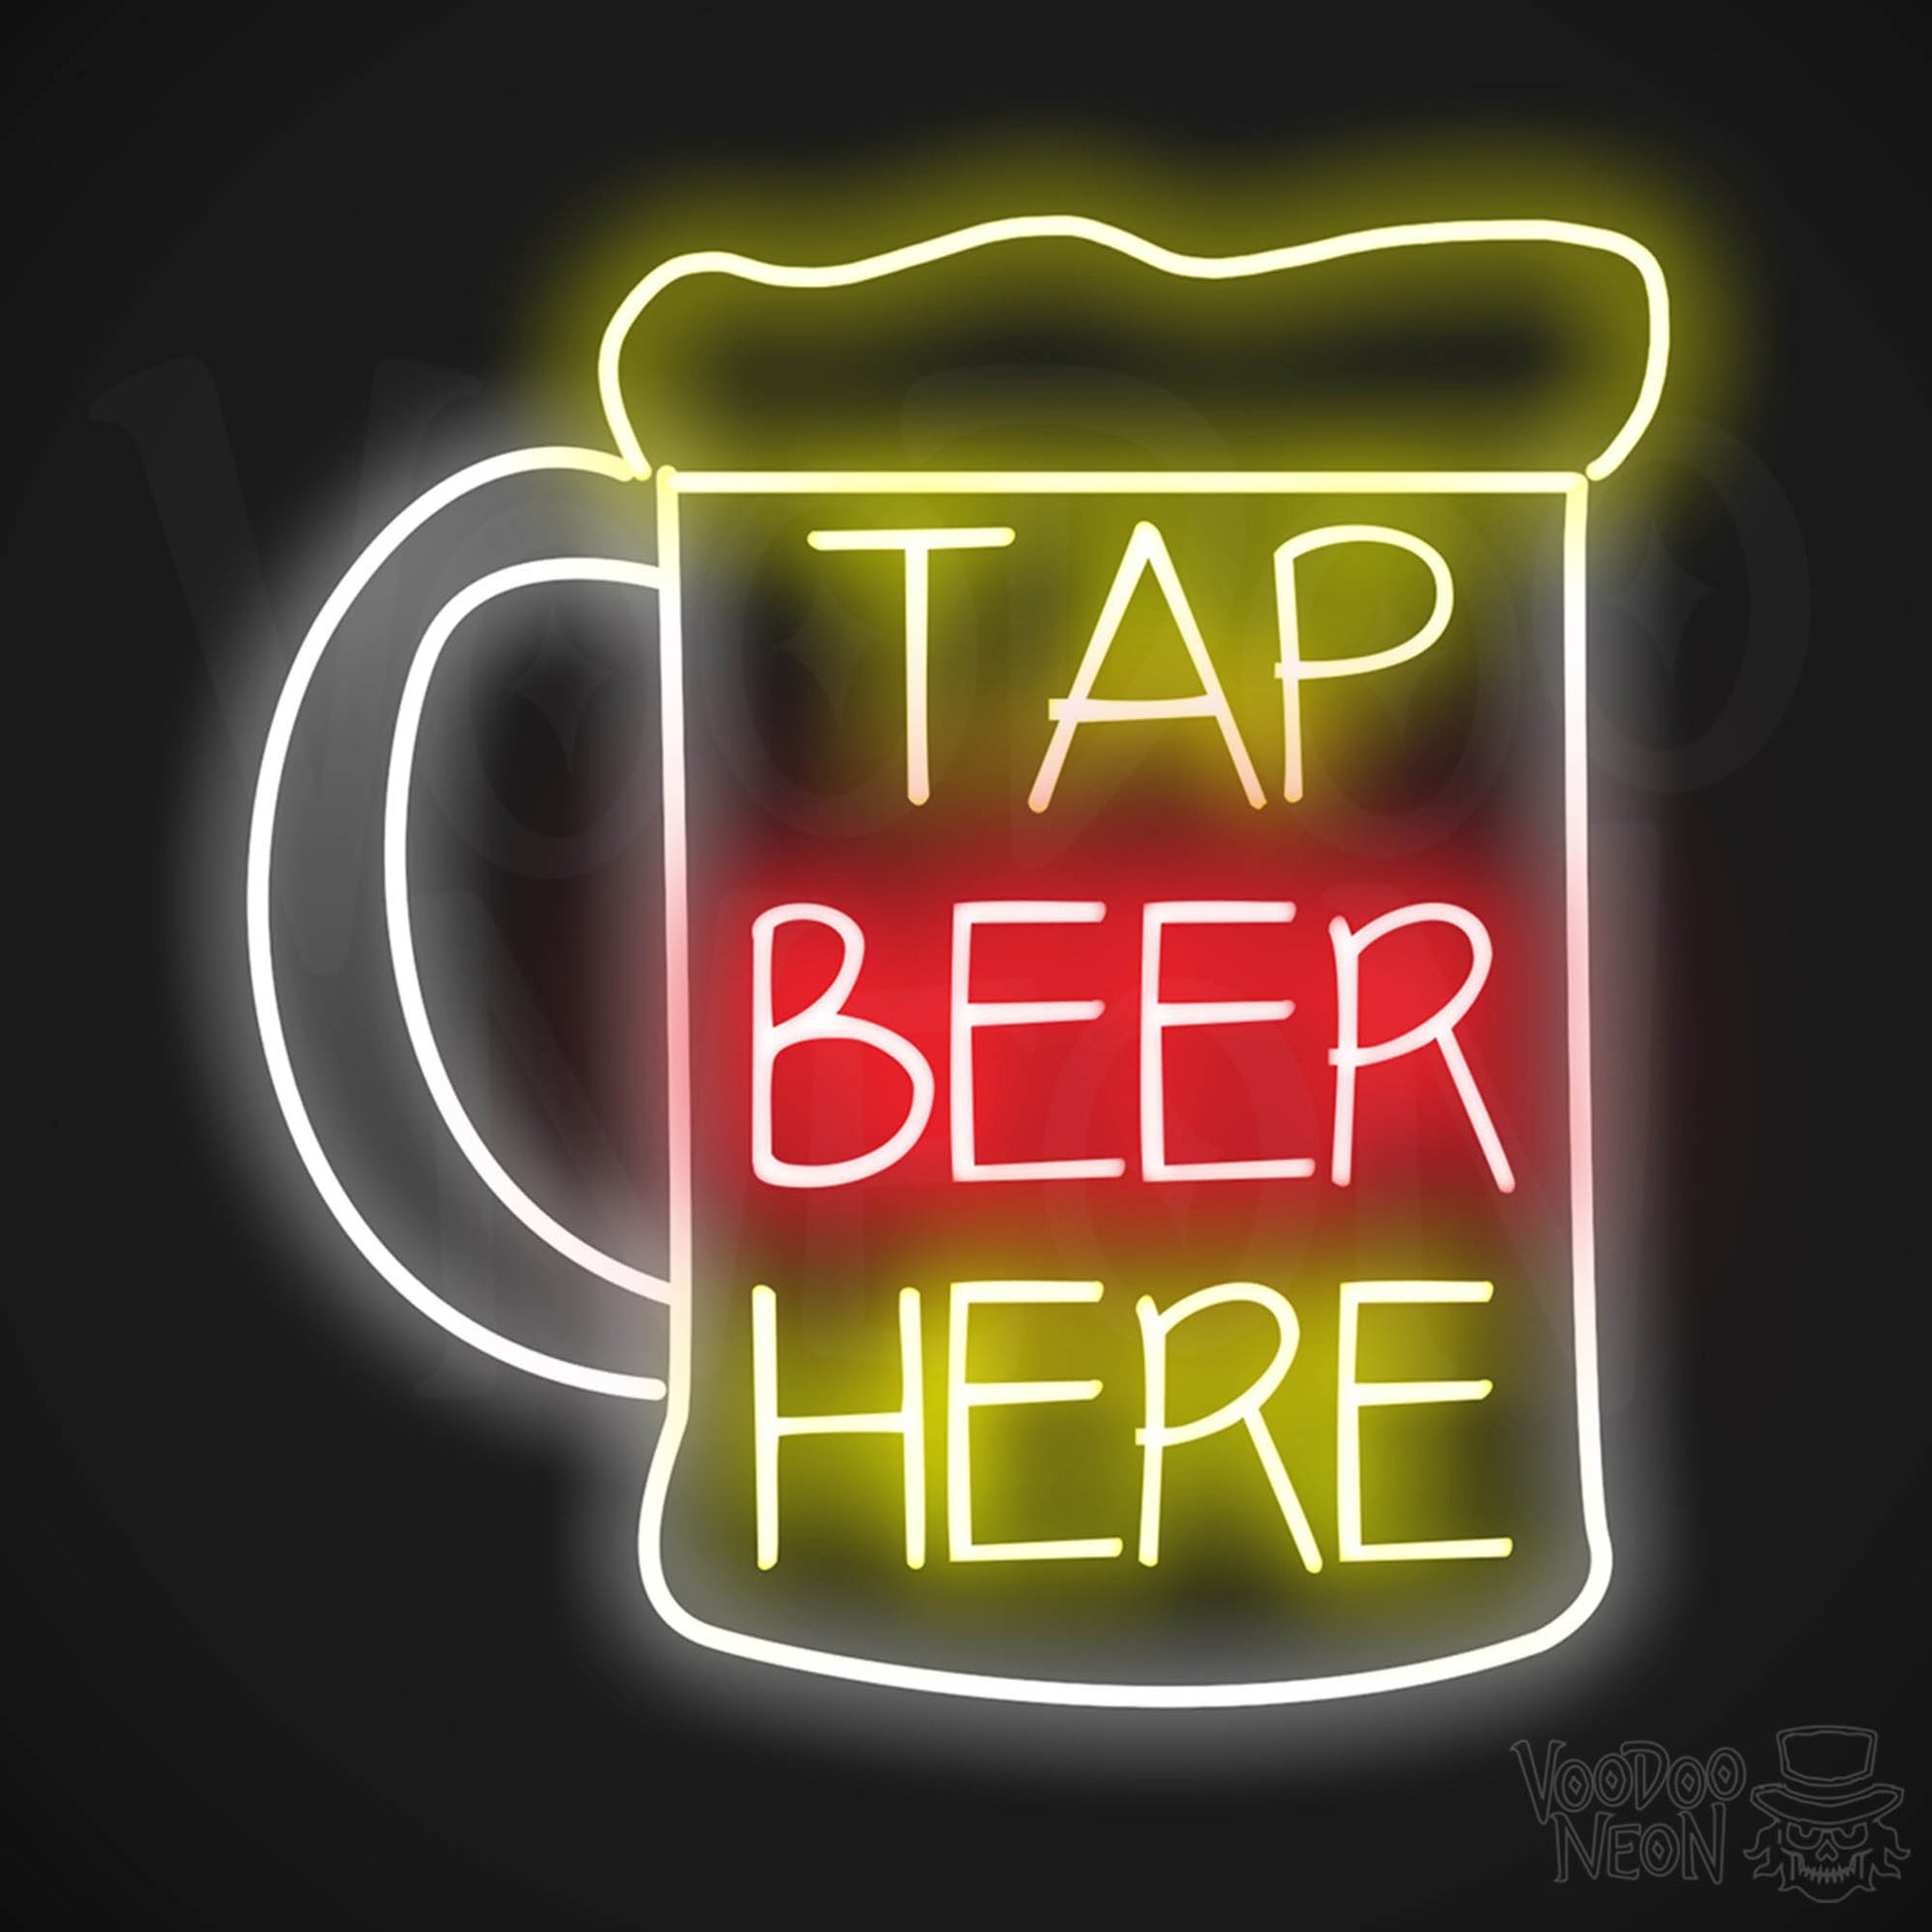 Tap Beer Here LED Neon - Multi-Color